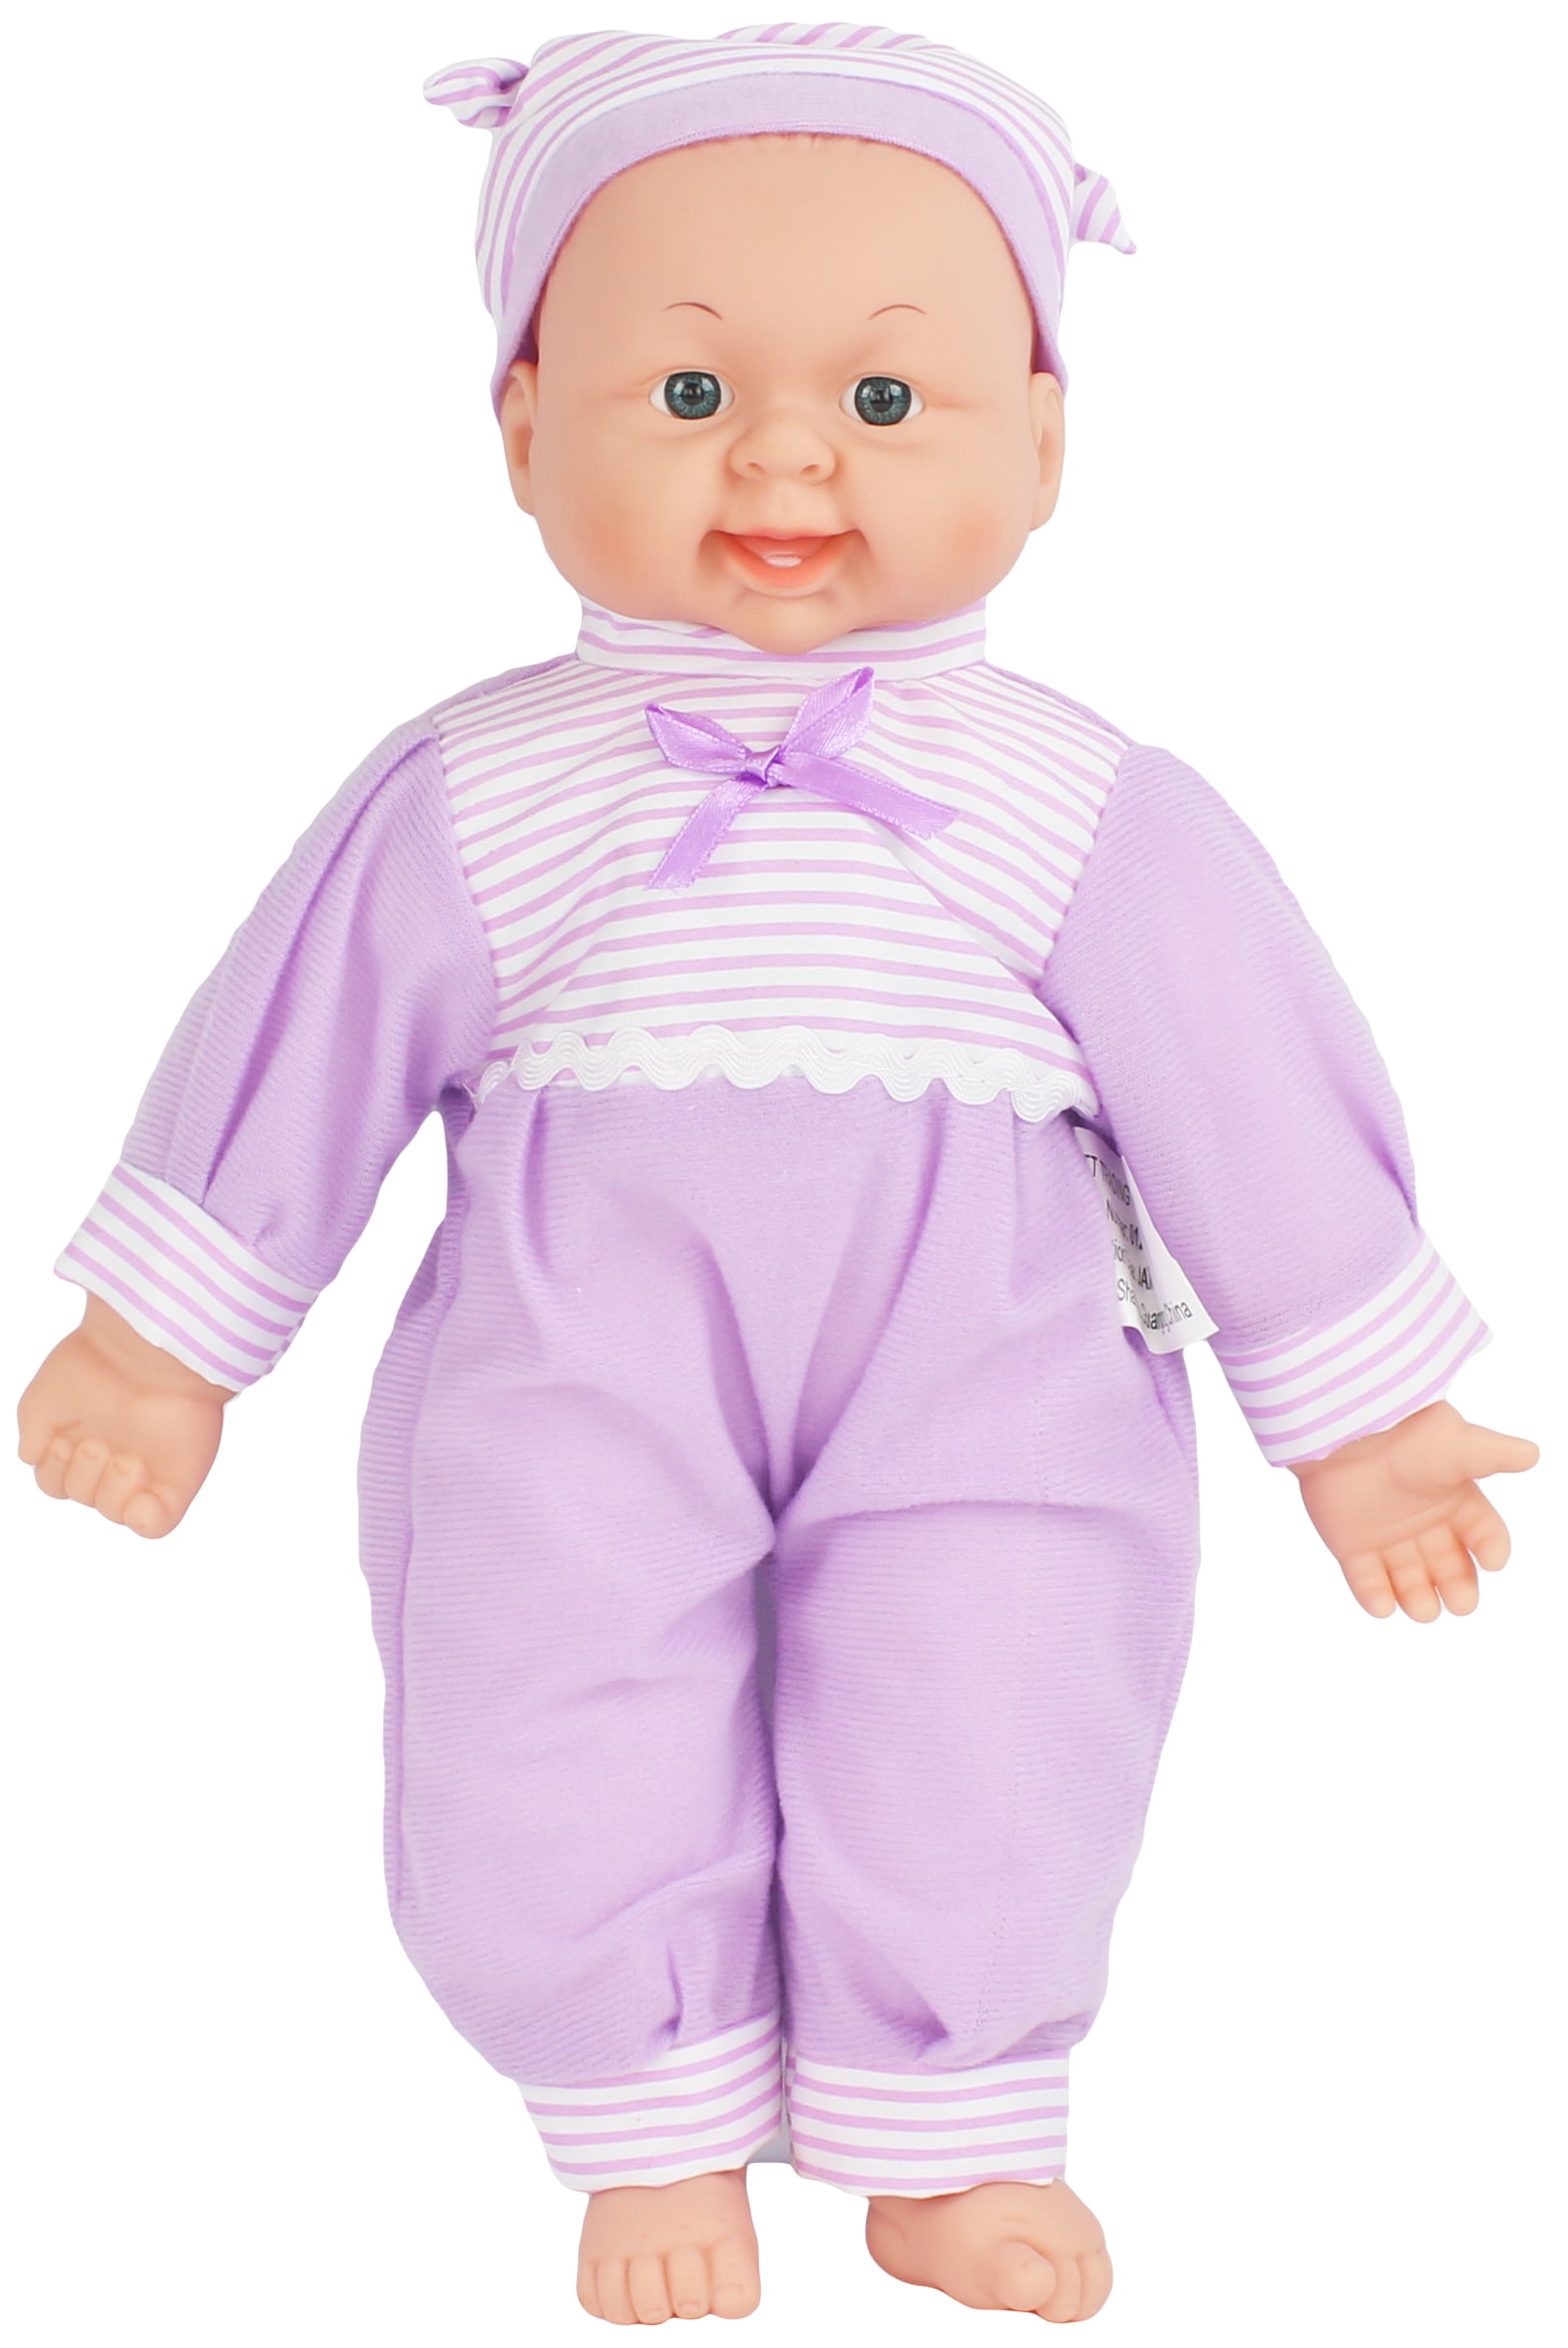 13" Baby Toy Doll That Sings Battery Operated, Singing Soft Rubber